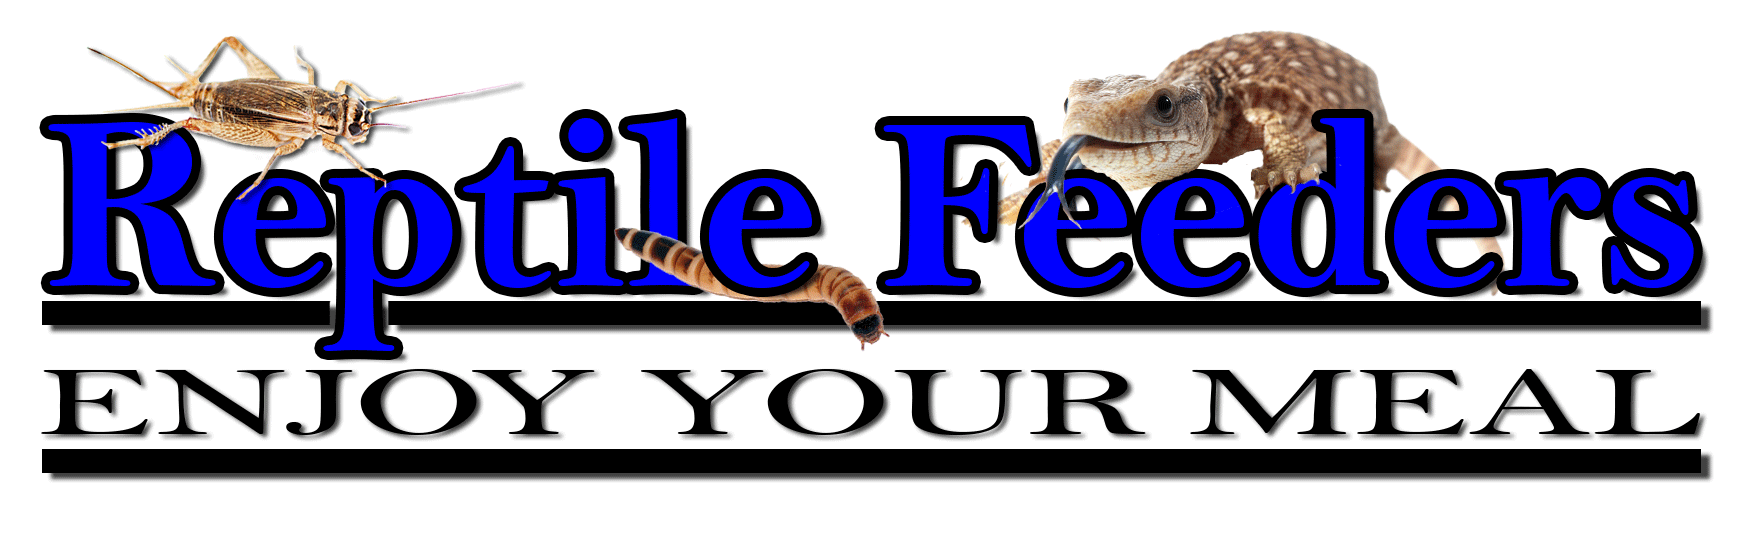 Reptile Feeders :: Enjoy Your Meal